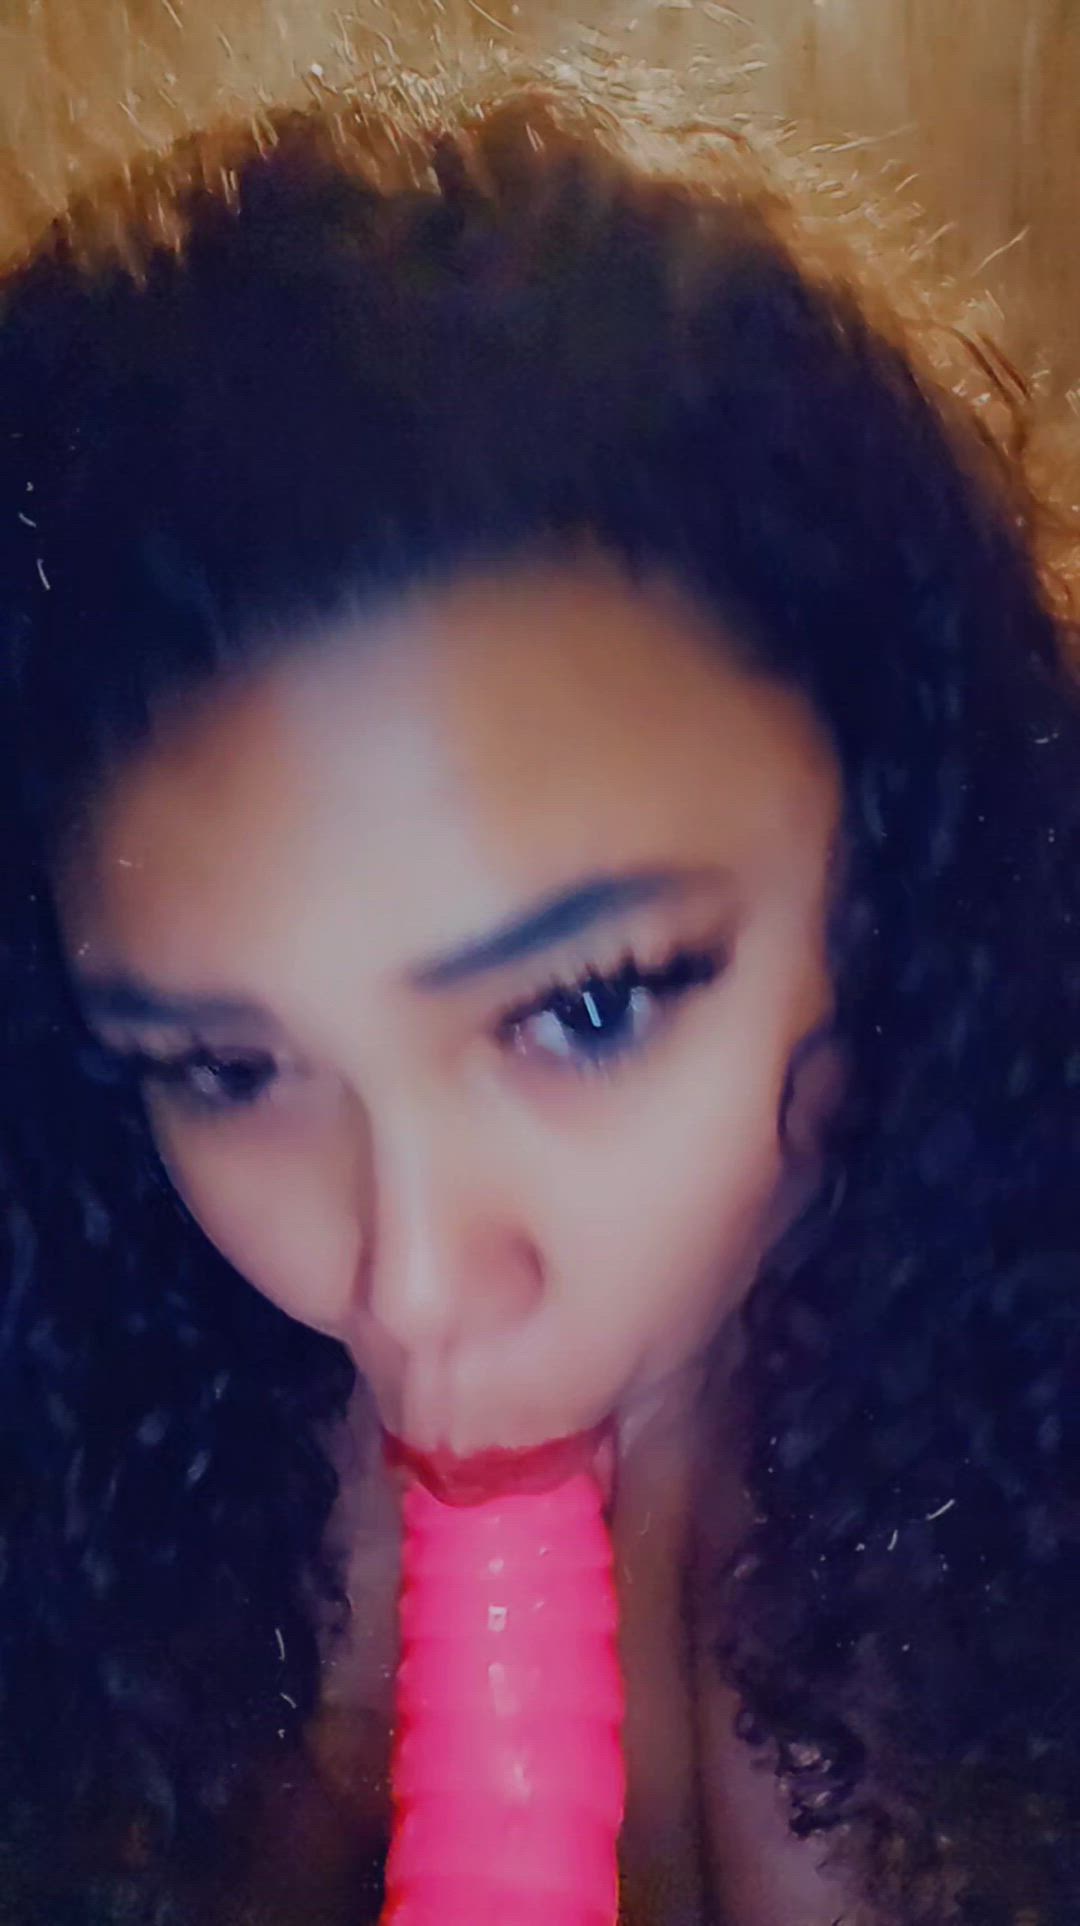 Tits porn video with onlyfans model meepmeep2022 <strong>@meepmeep2022</strong>